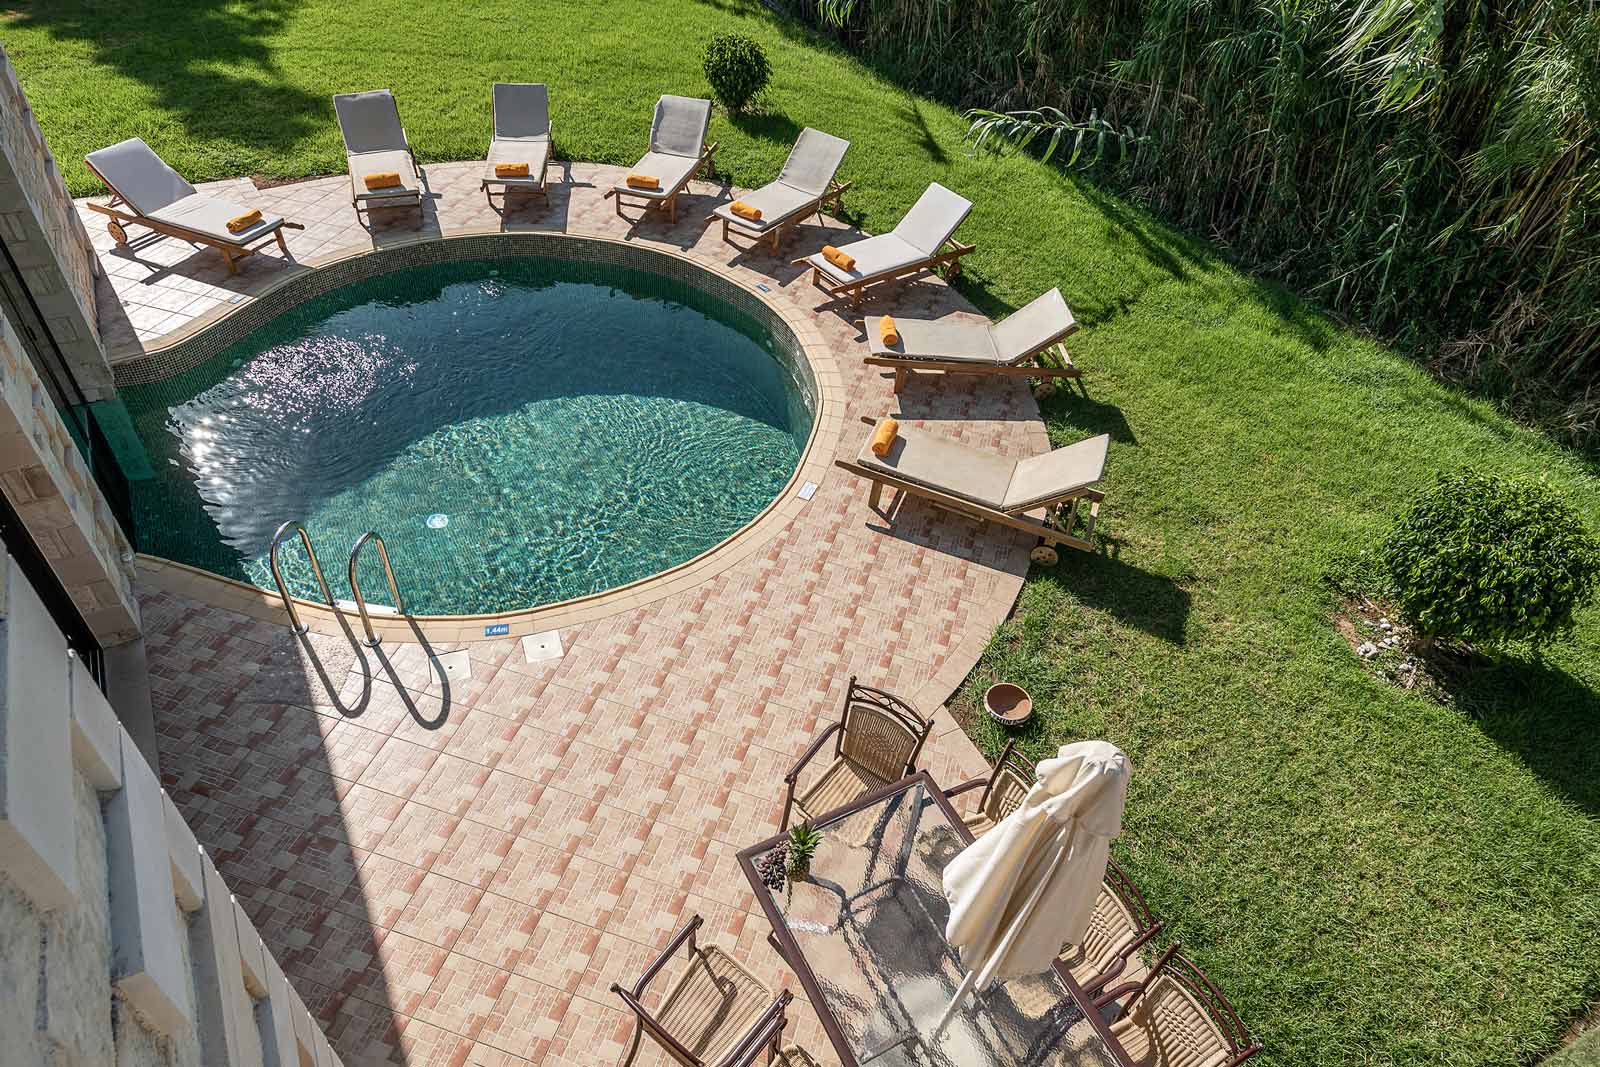 Villa's outdoor pool from above